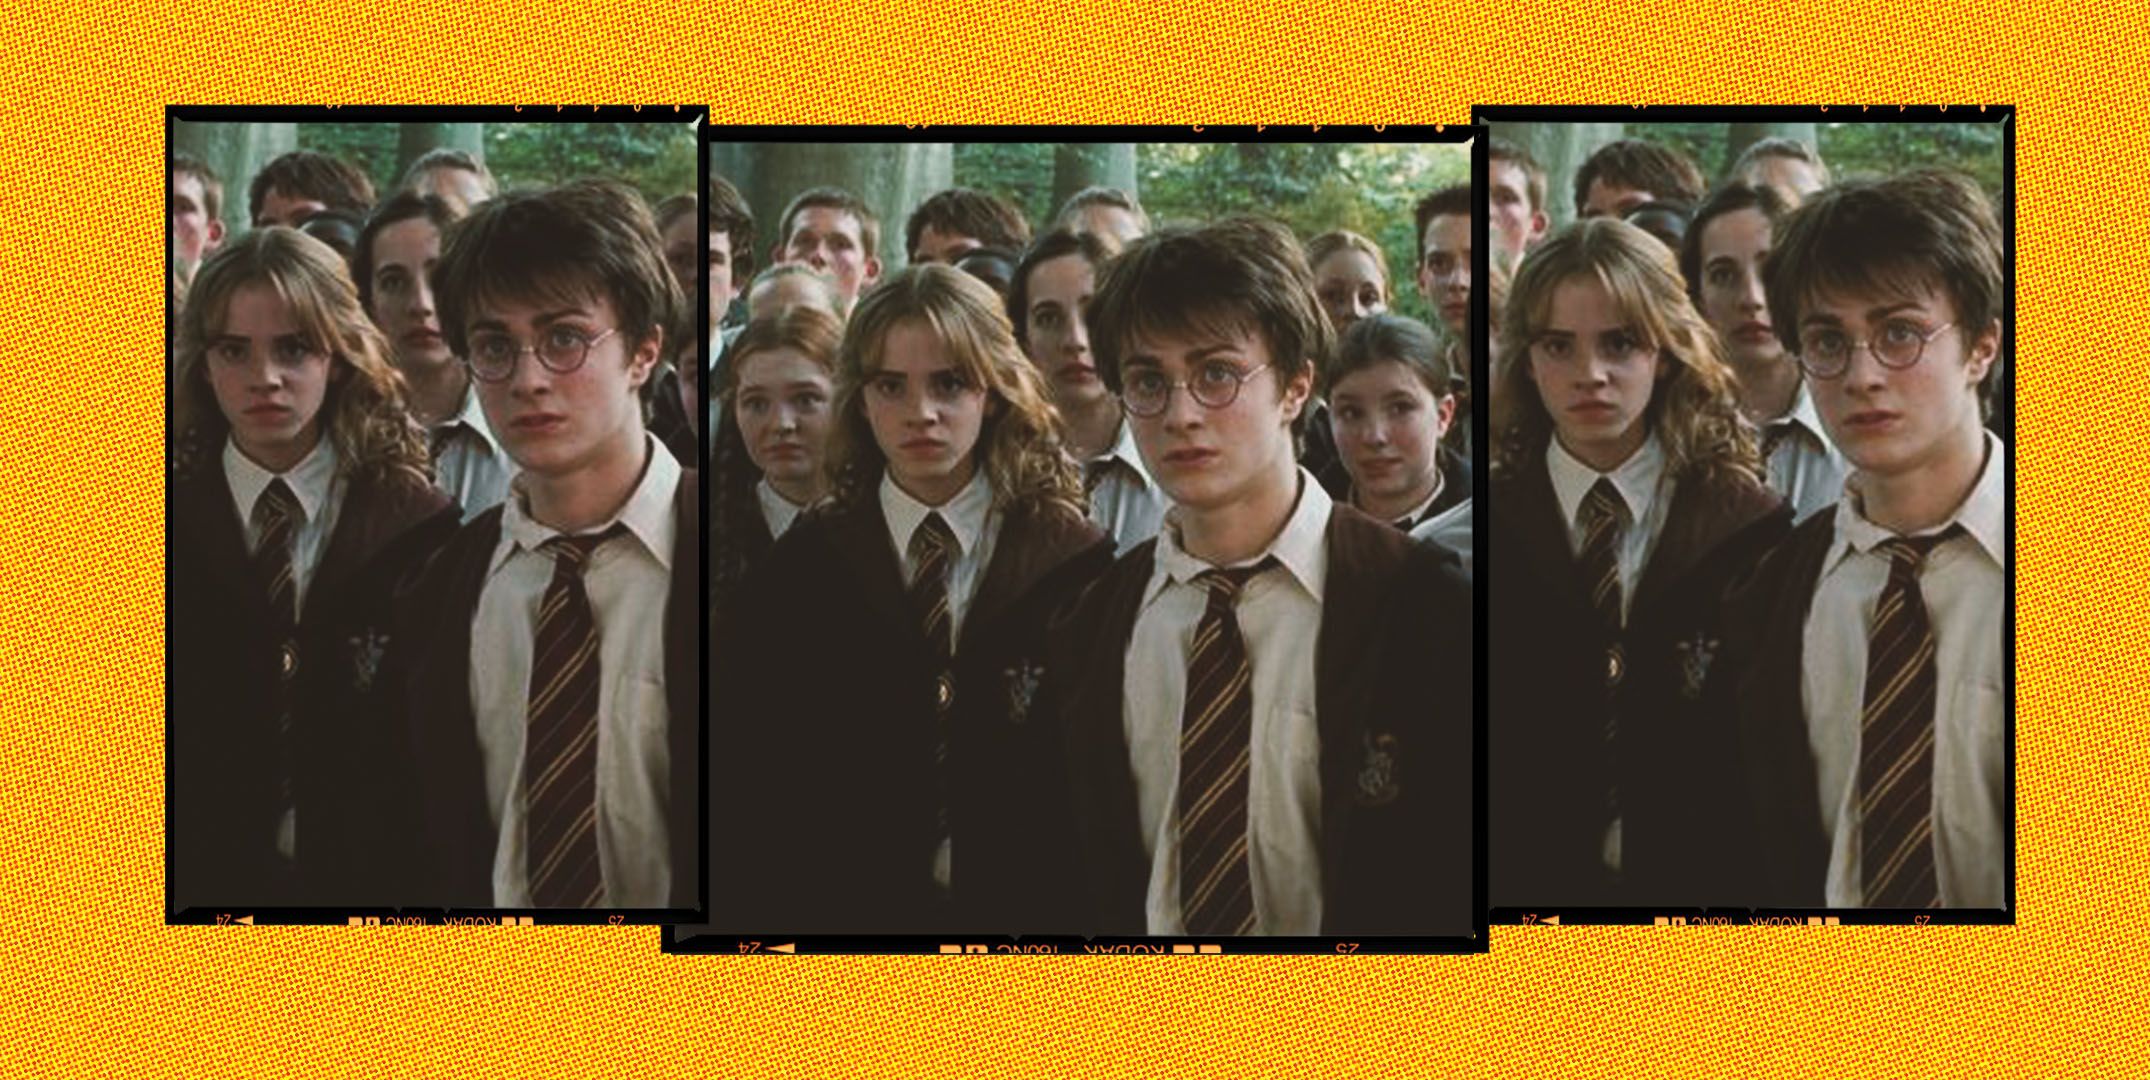 The Harry Potter films in order: Where to watch Potter online